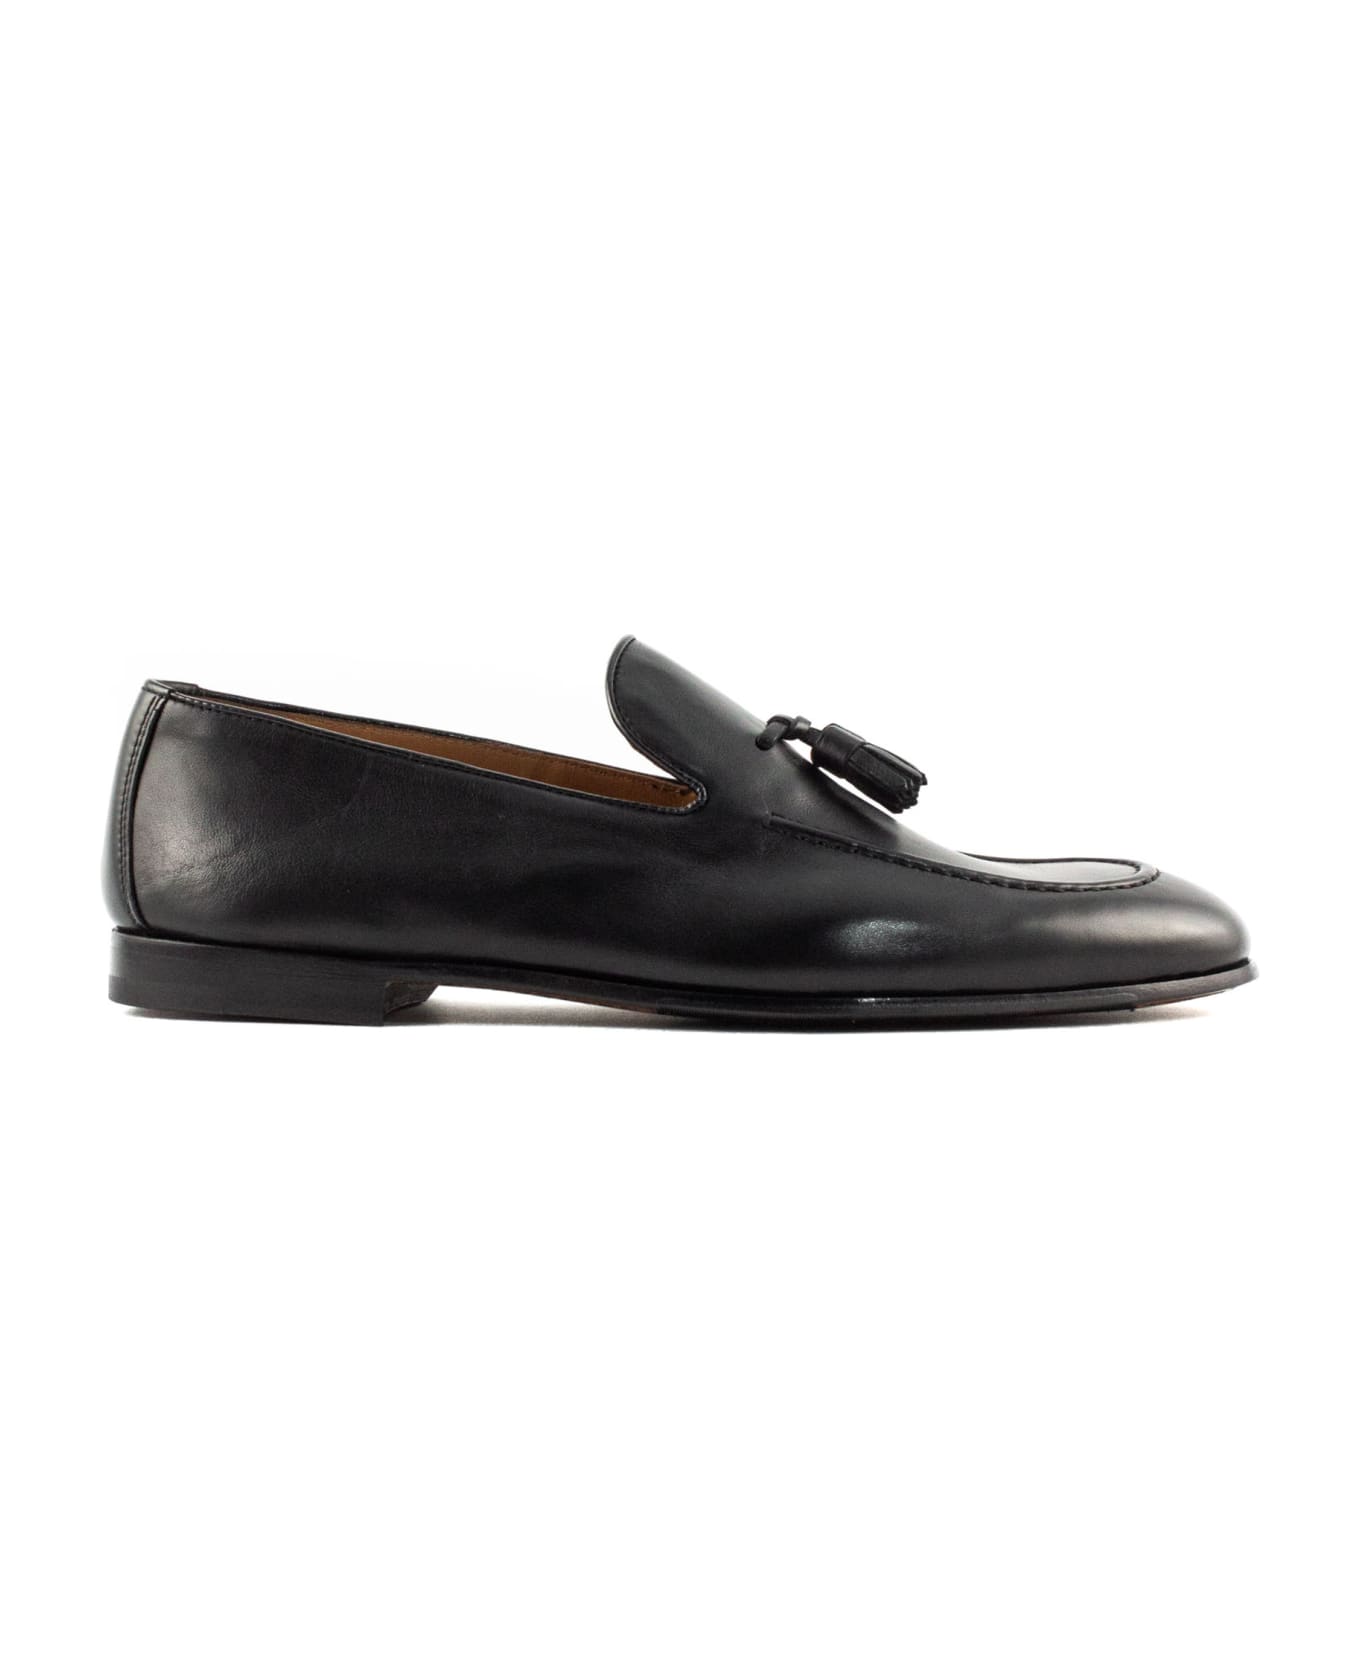 Doucal's Black Smooth Leather Loafer - Nero